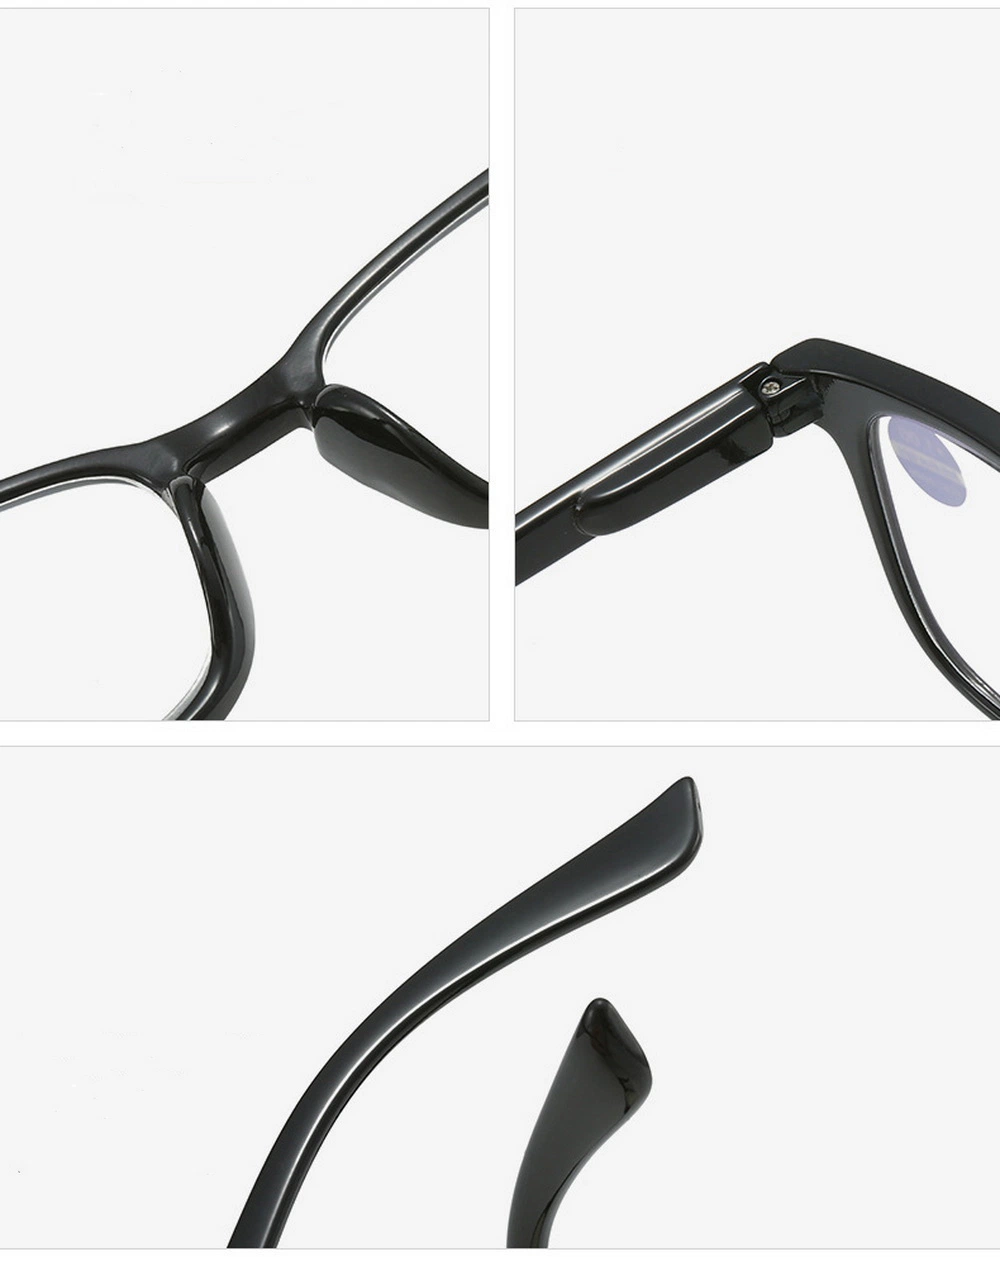 New Arrival Hot Selling High Quality PC Frame Reading Glasses in Ready Stock